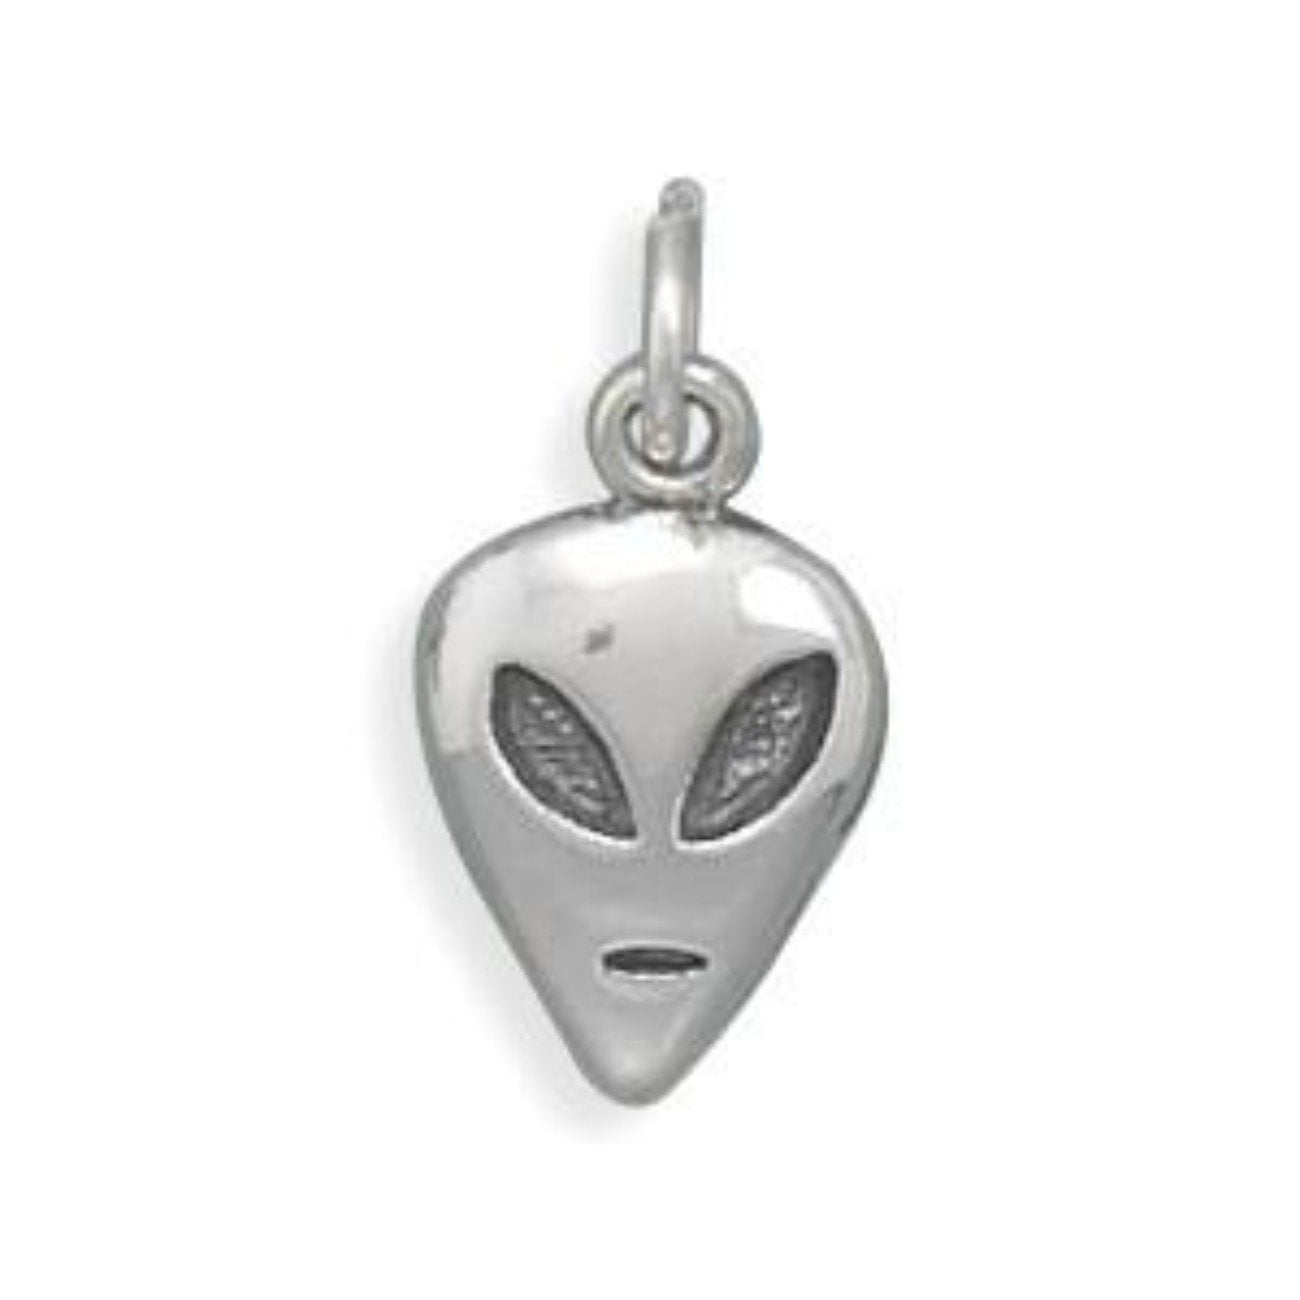 GRAPHICS & MORE Aliens Believe in Me Funny Humor Antiqued Bracelet Pendant Zipper Pull Oval Charm with Lobster Clasp